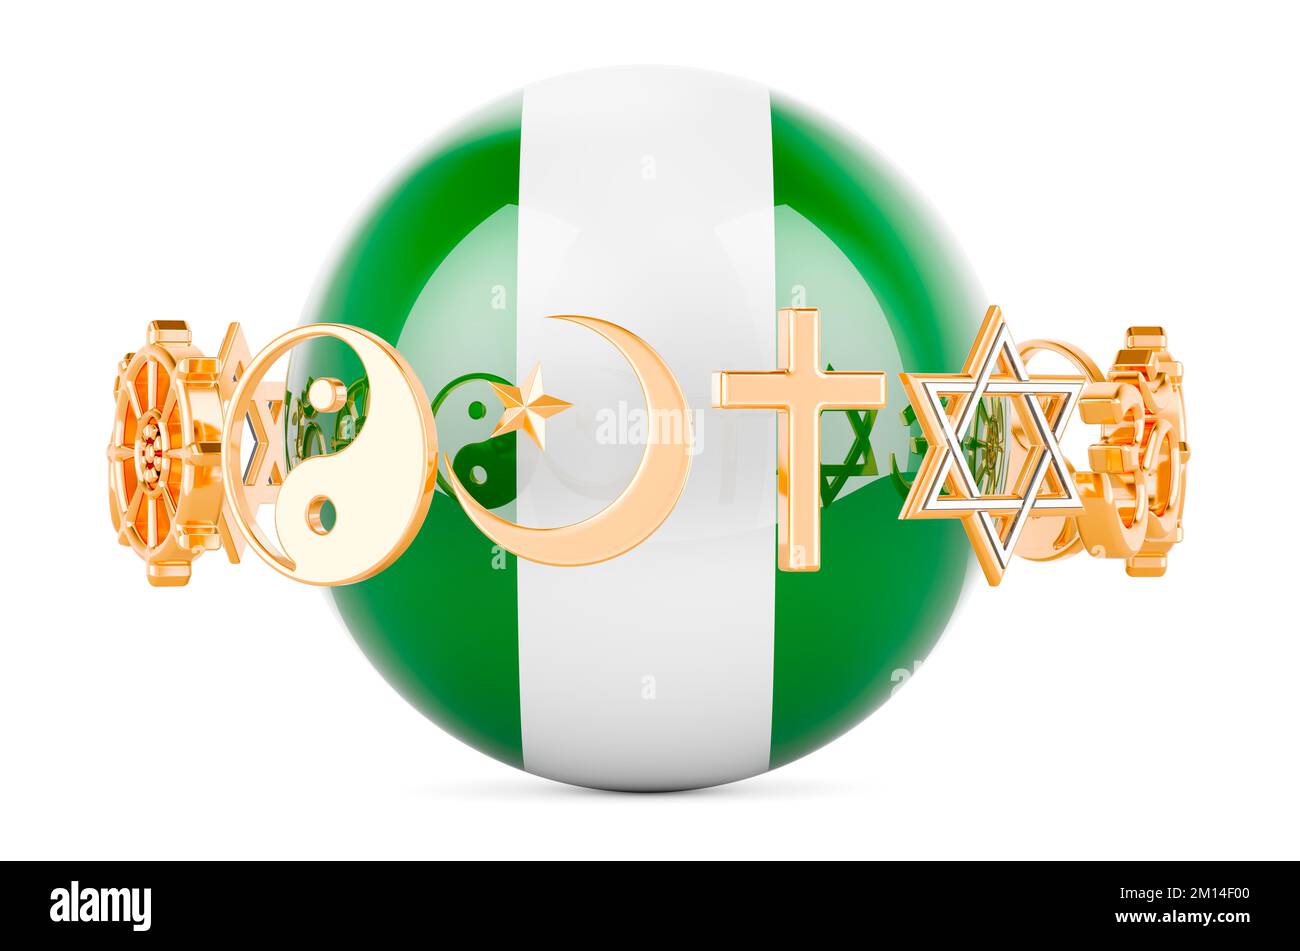 Nigerian flag painted on sphere with religions symbols around, 3D rendering isolated on white background Stock Photo